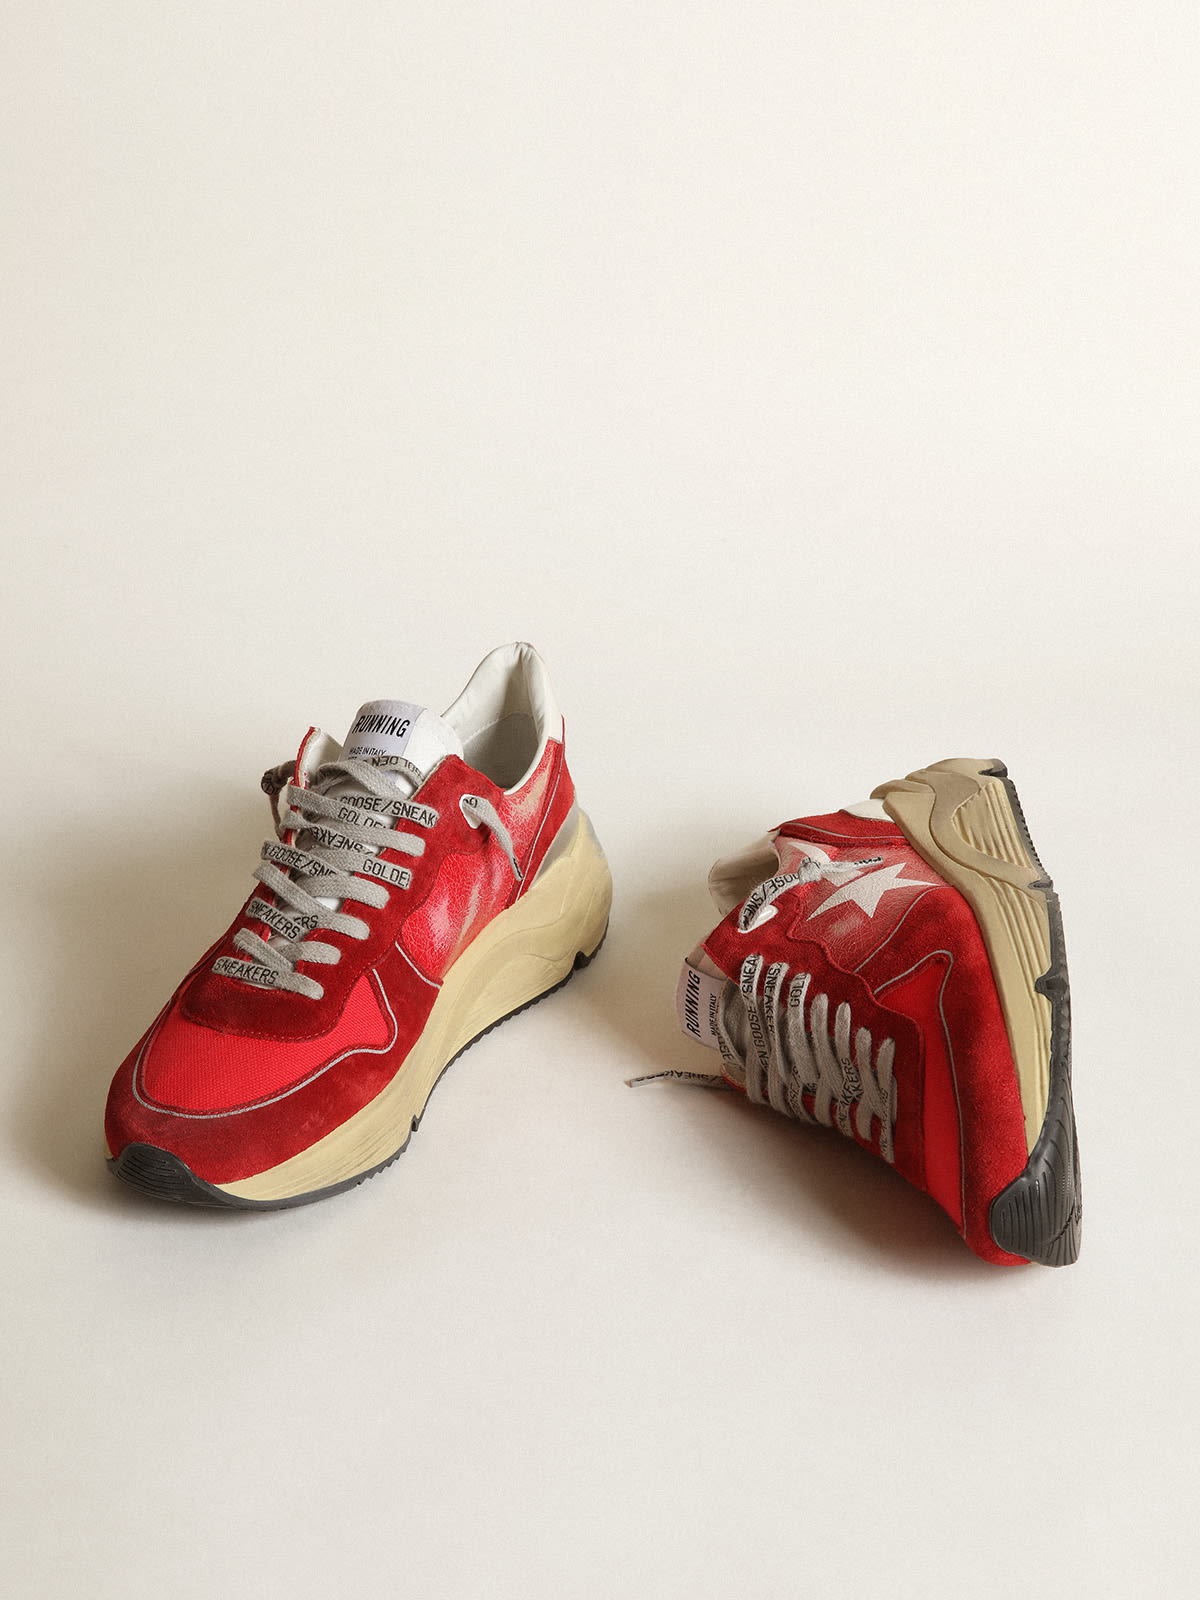 Golden Goose - Running Sole sneakers in red crackle leather with red suede inserts and screen-printed white star in 